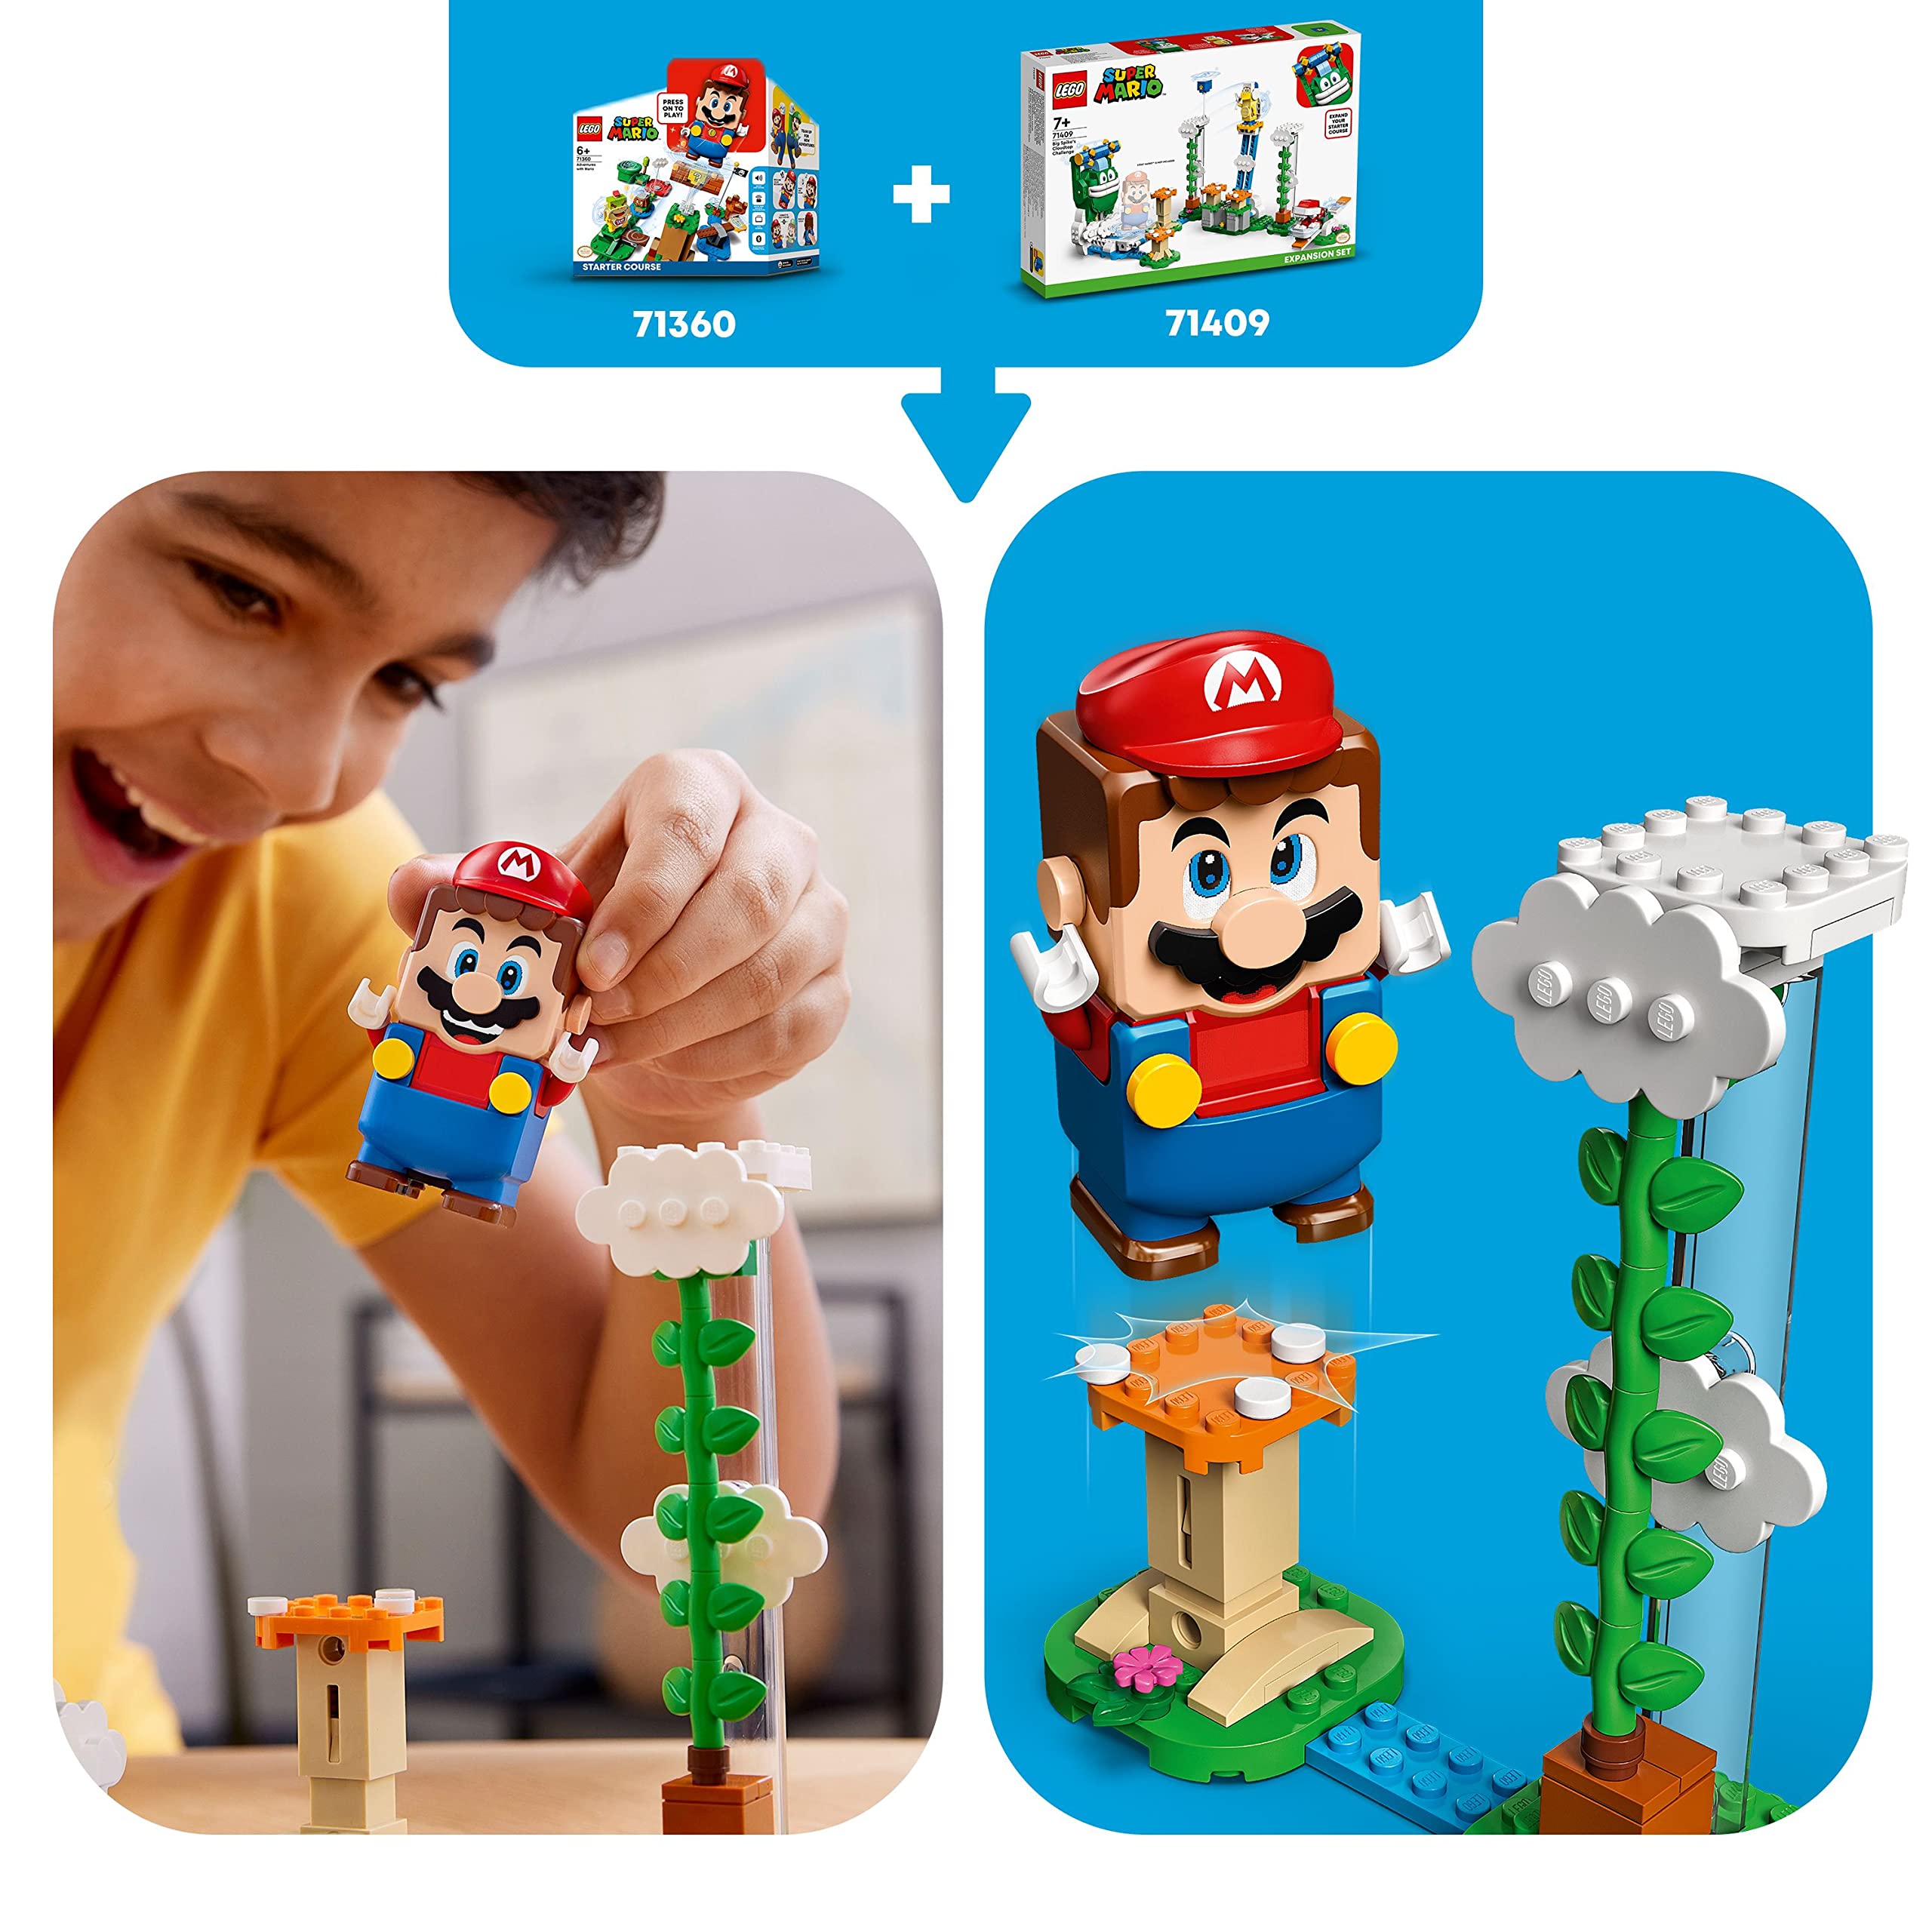 LEGO Super Mario Big Spike’s Cloudtop Challenge Expansion Set 71409, Collectible Toy for Kids with 3 Figures Including Boomerang Bro and Piranha Plant